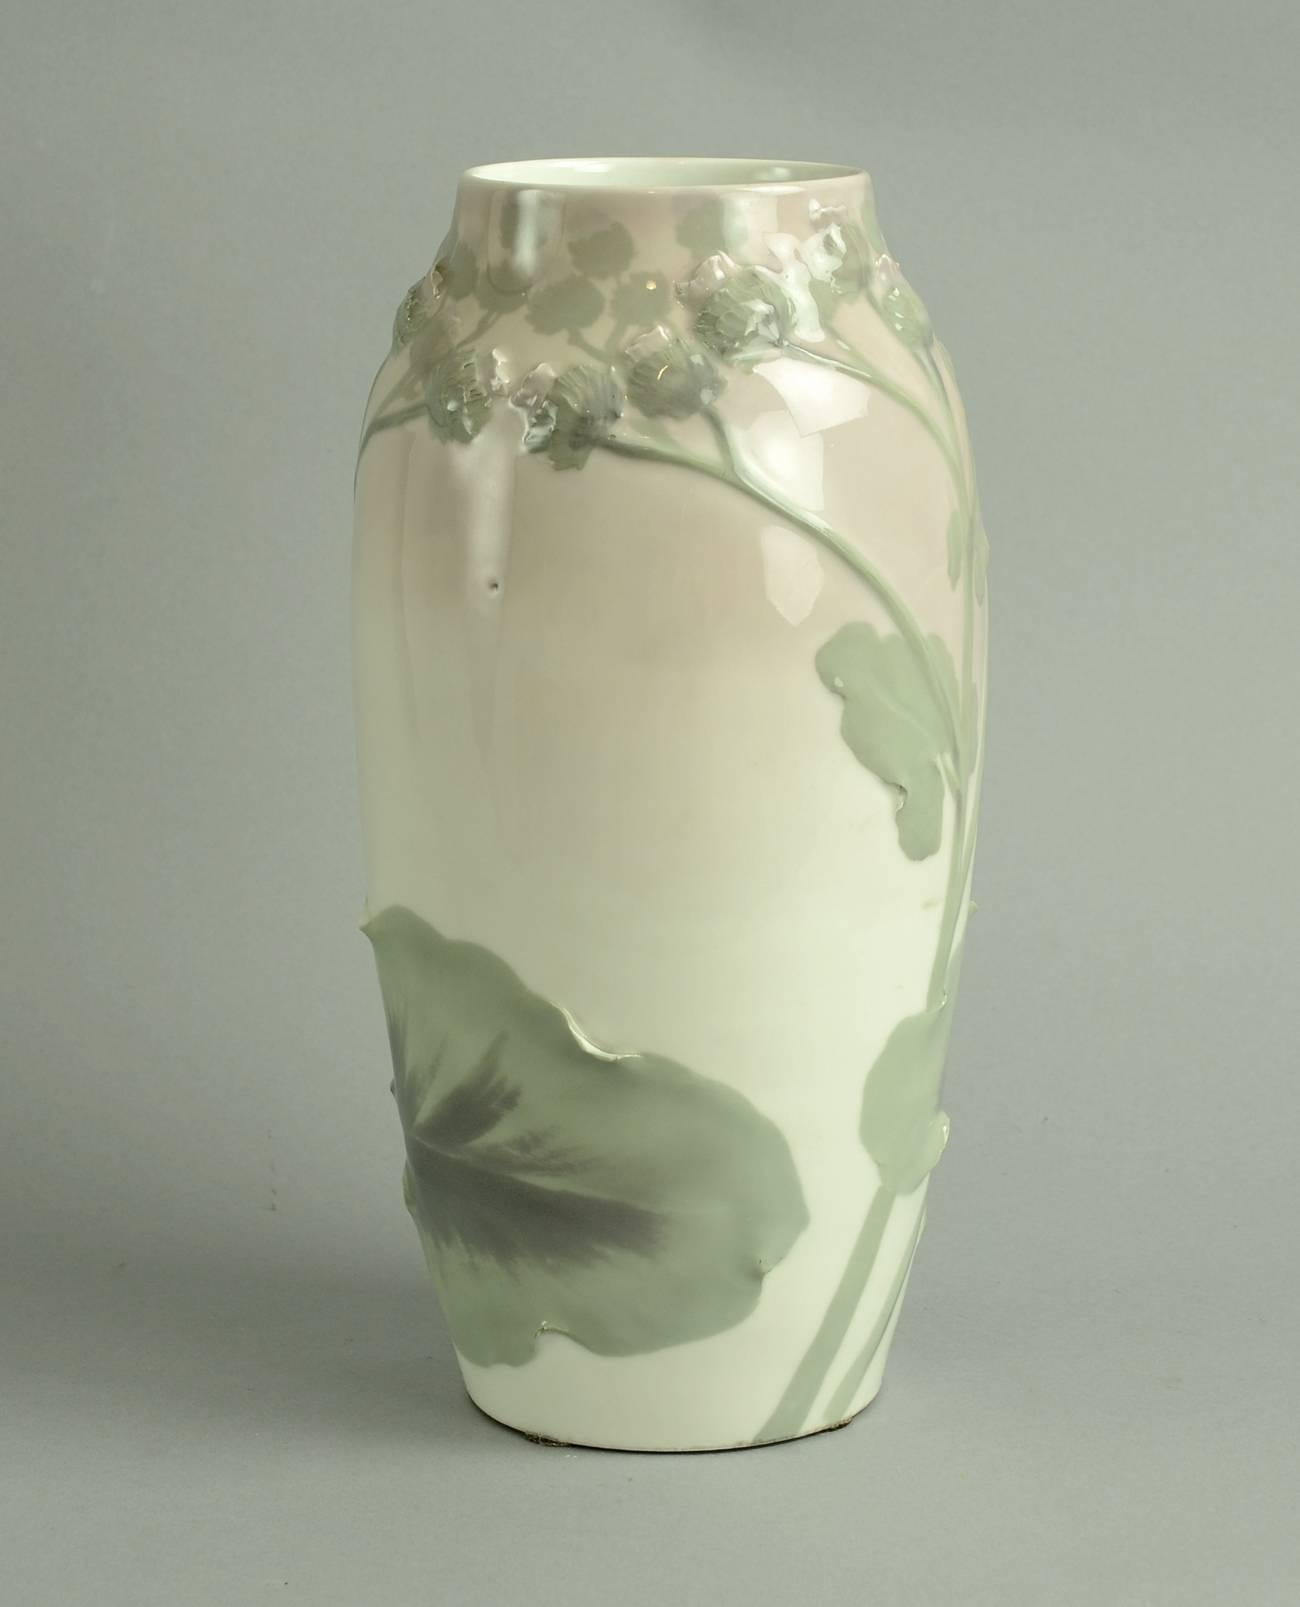 Glazed Art Nouveau Porcelain Vase with Thistle Relief by Rörstrand, circa 1910s-1920s